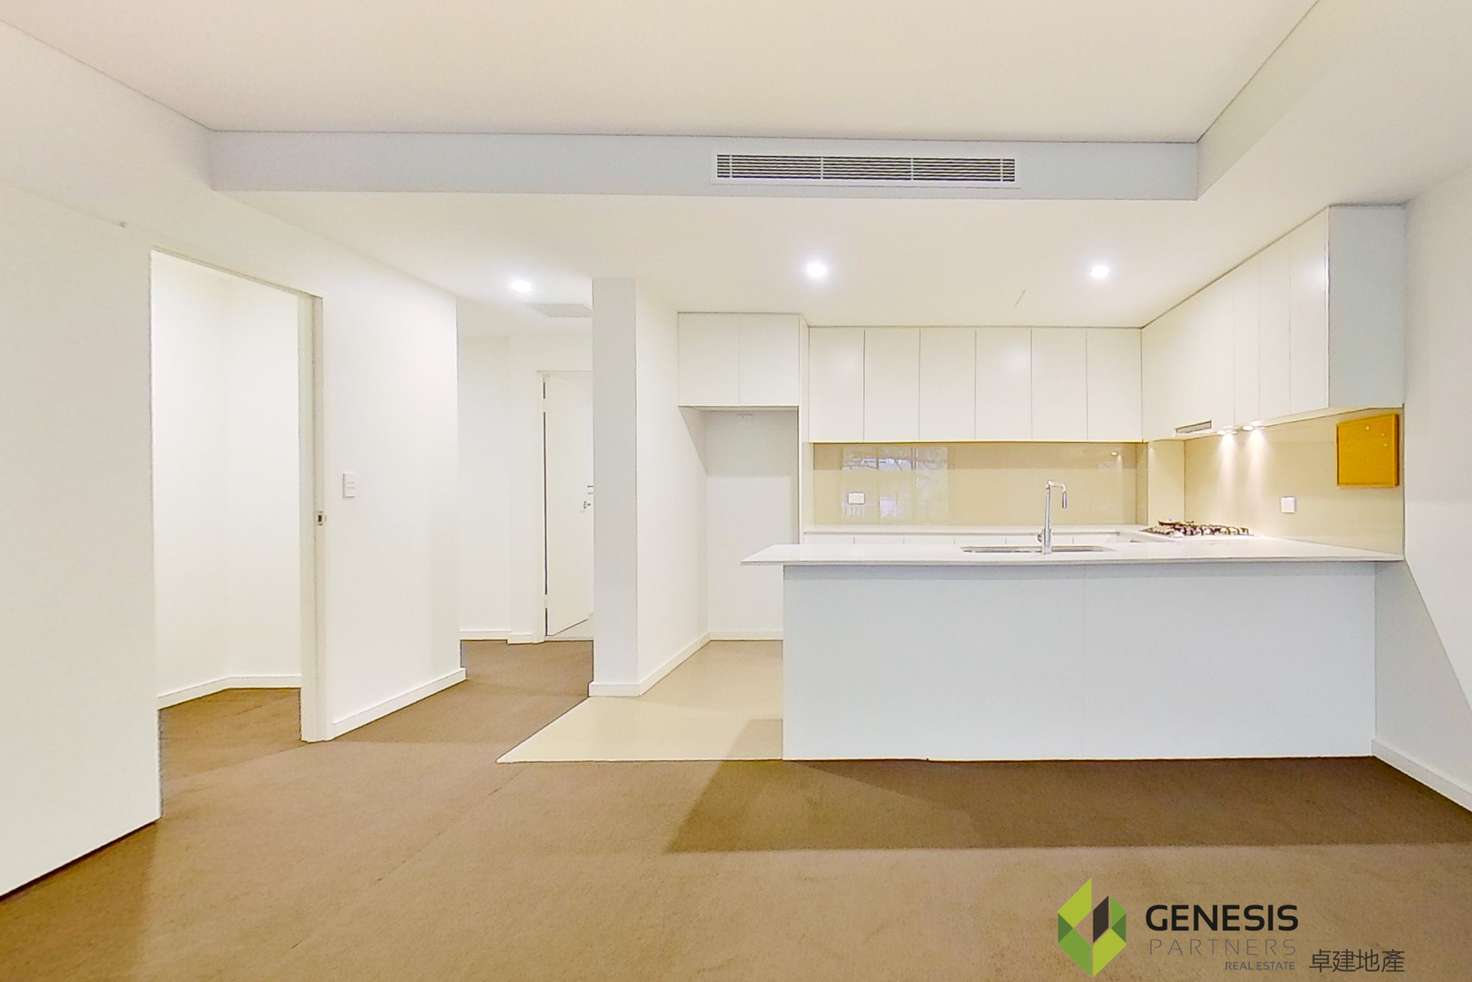 Main view of Homely apartment listing, 35/217-221 Carlingford Road, Carlingford NSW 2118